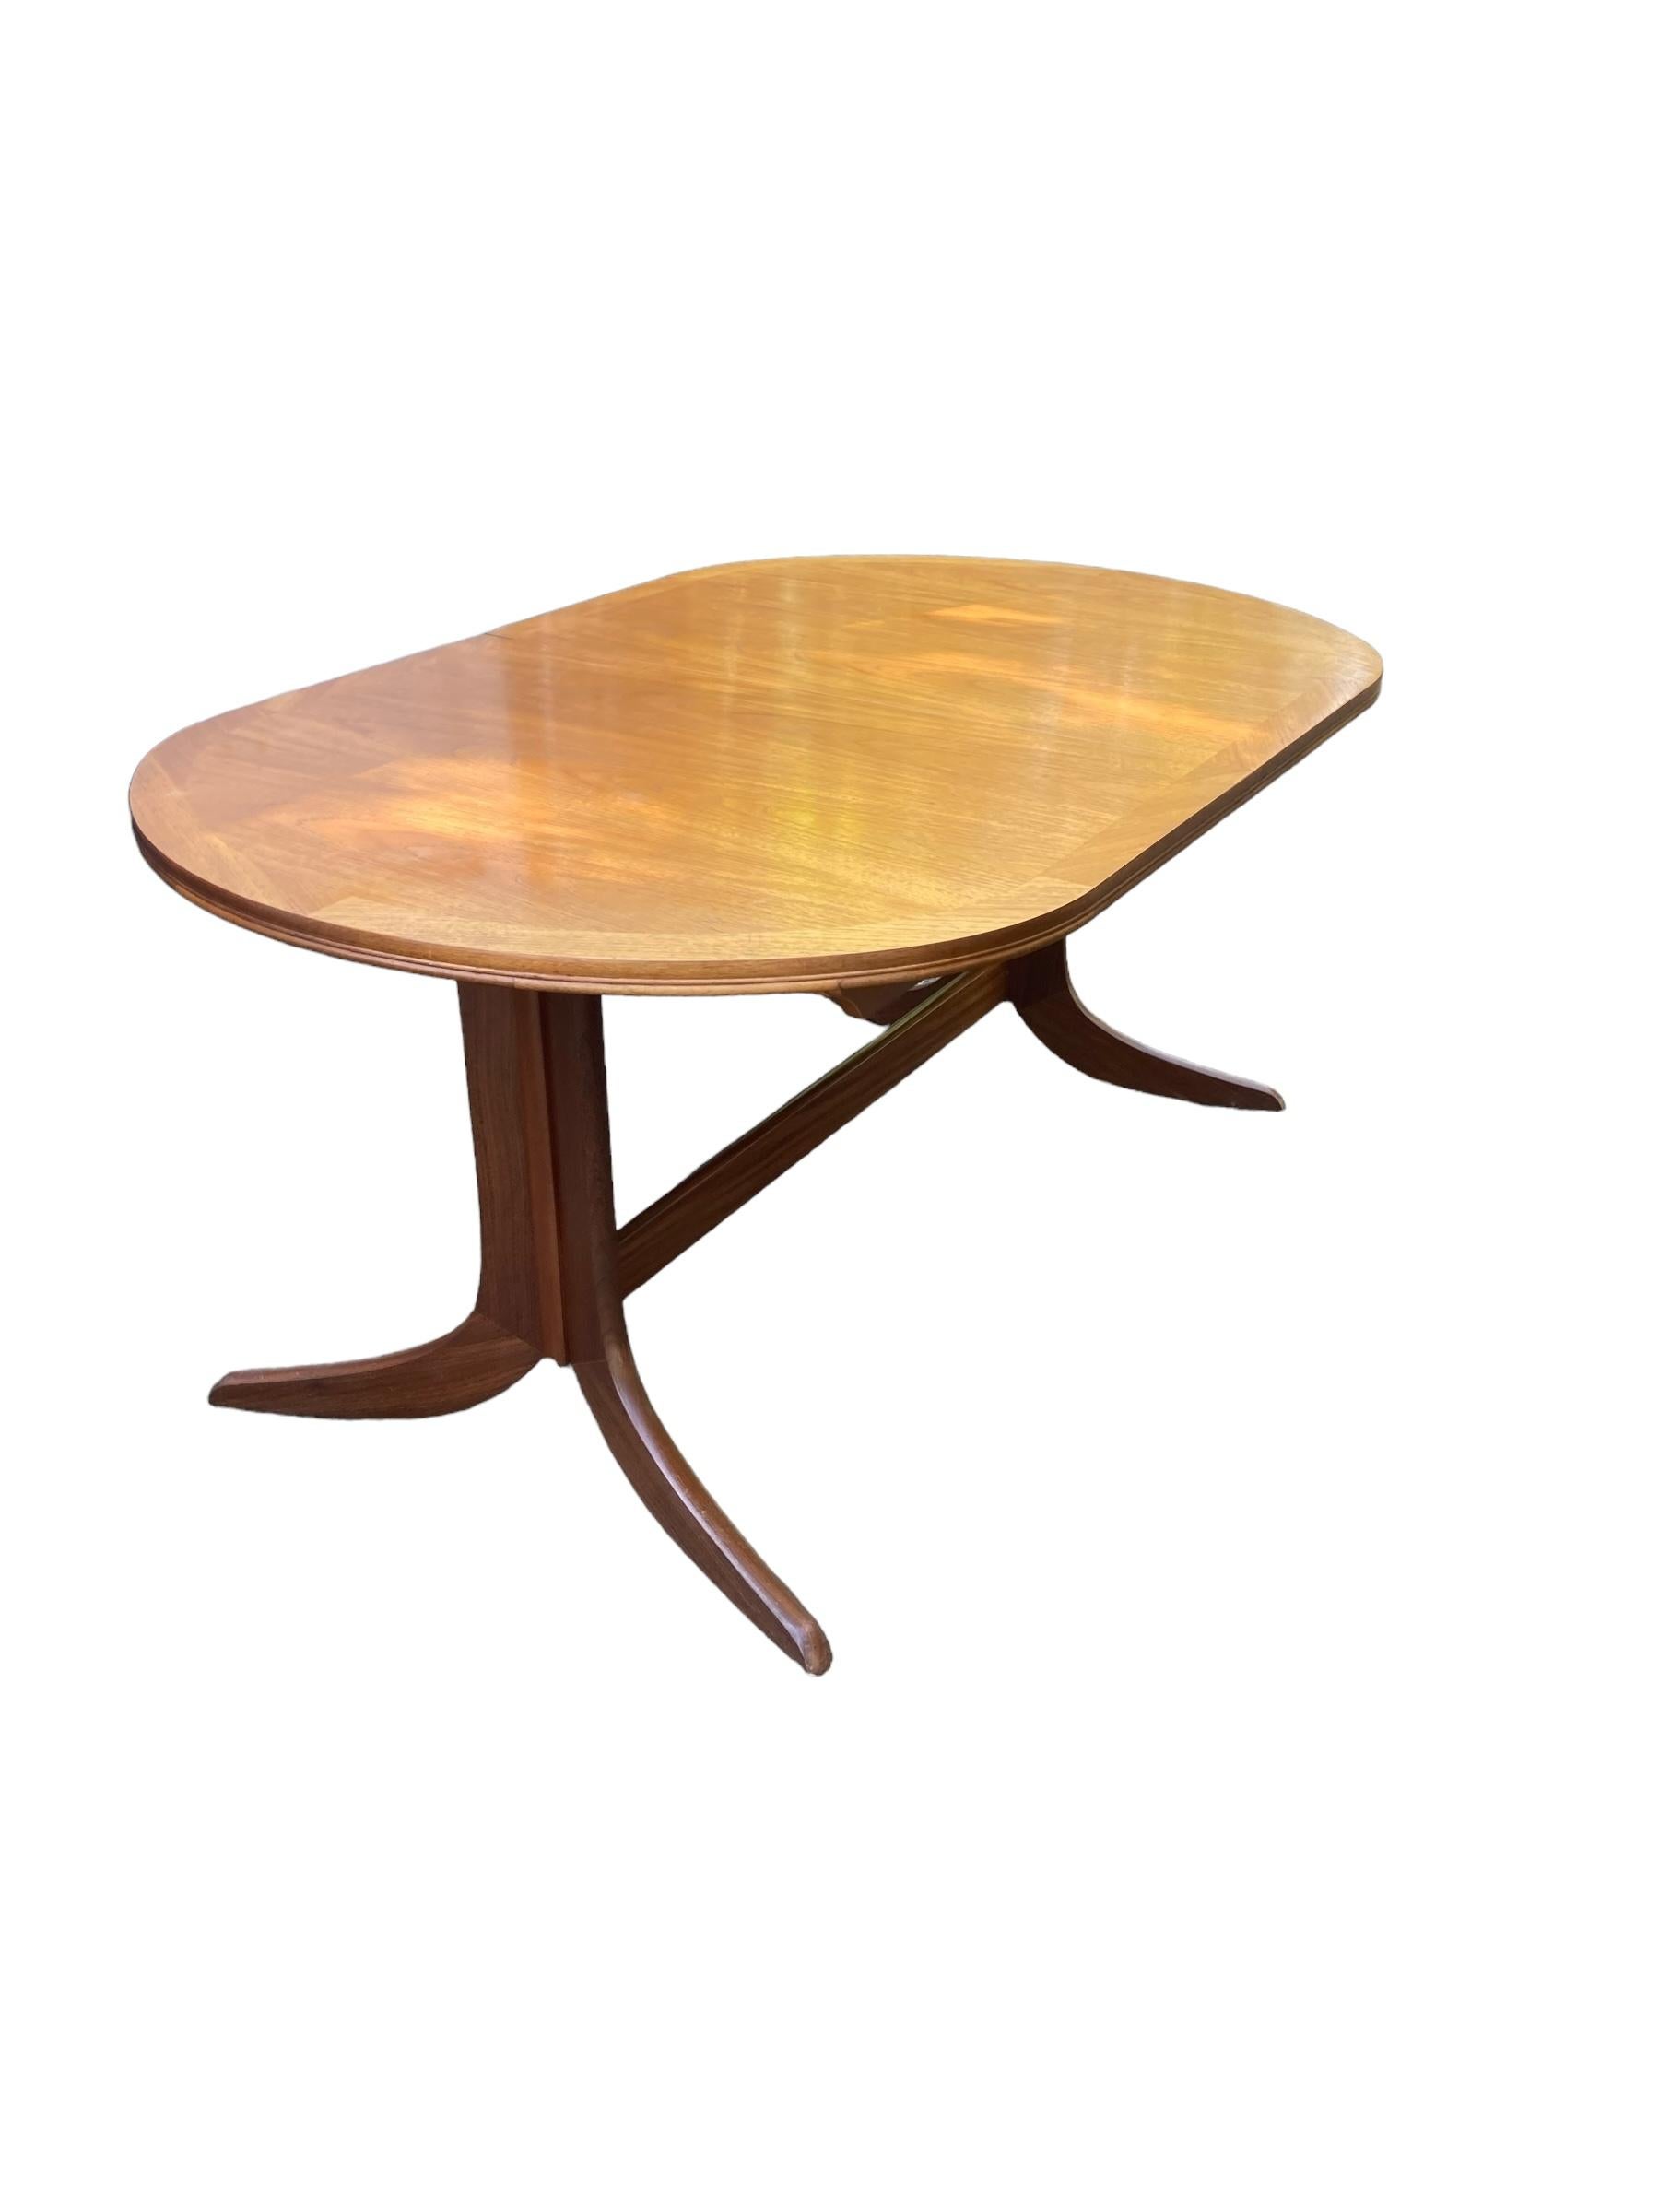 Nathan Extendable Teak Mid Century Dining Table, classic fishtail deaign legs. Great condition. These tables are easily extended with the butterfly design centre piece that pulls out to seat seat to eight people comfortably, then pushes back